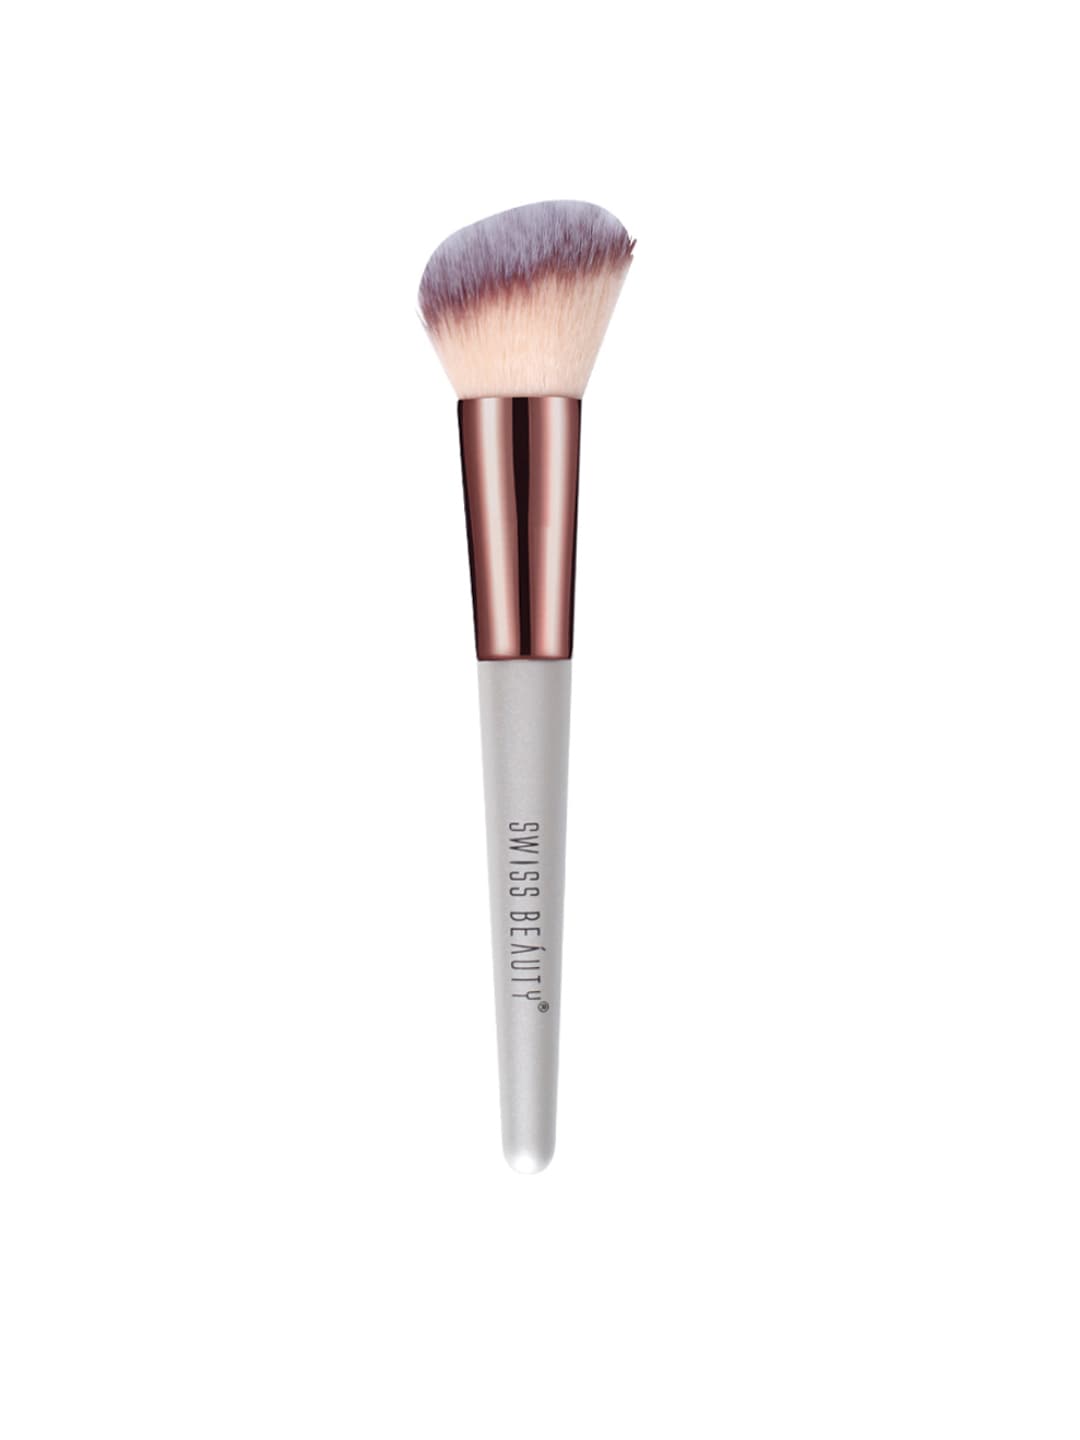 SWISS BEAUTY Beauty Angled Blusher Brush Price in India